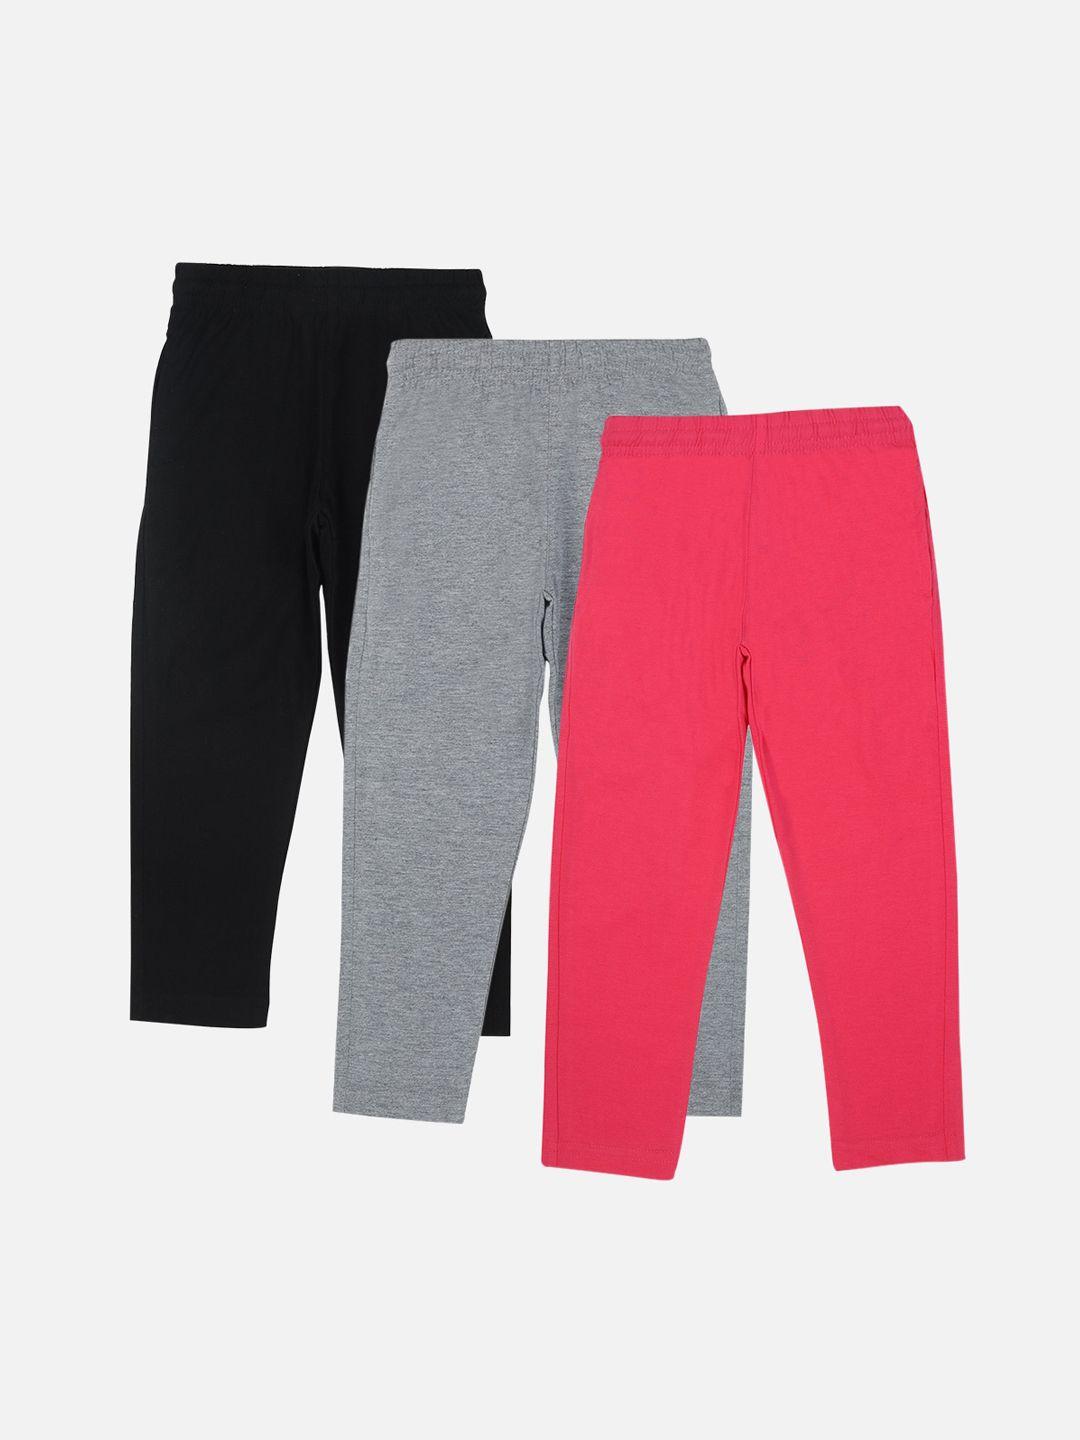 dyca girls pack of 3 solid cotton track pants